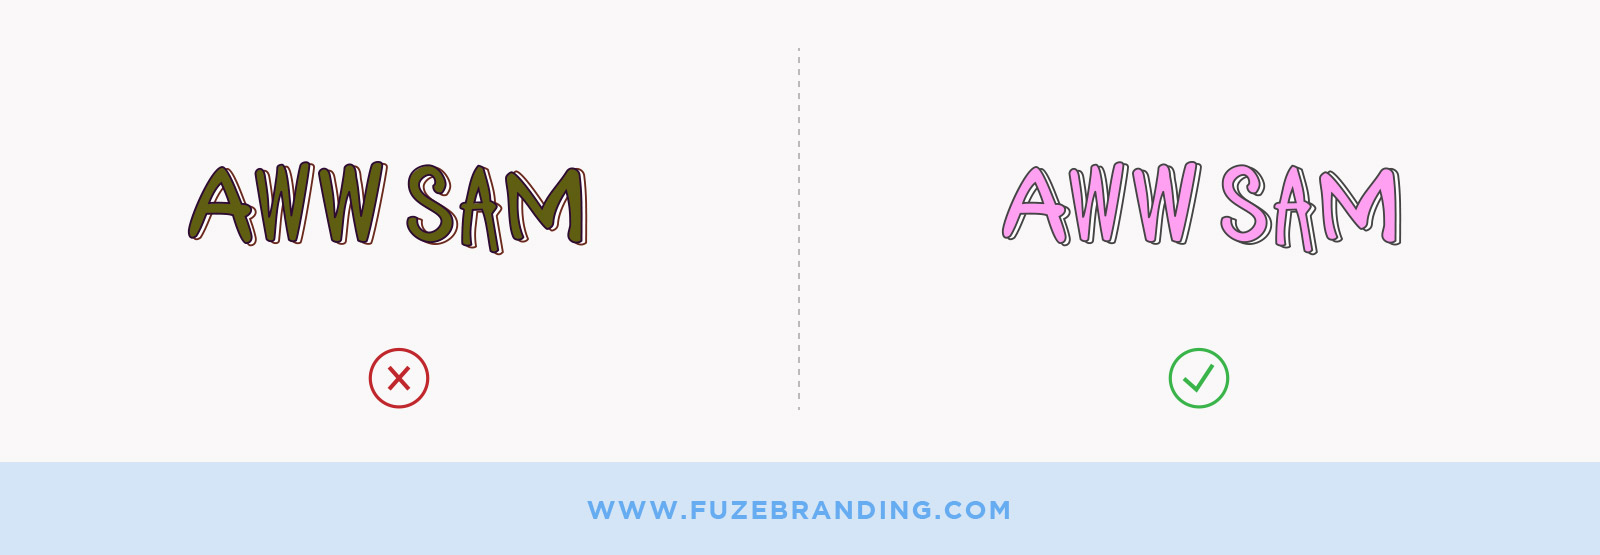 Fuze-Branding-Small-Business-Logo-Design-Mistakes-Offbrand-Colors